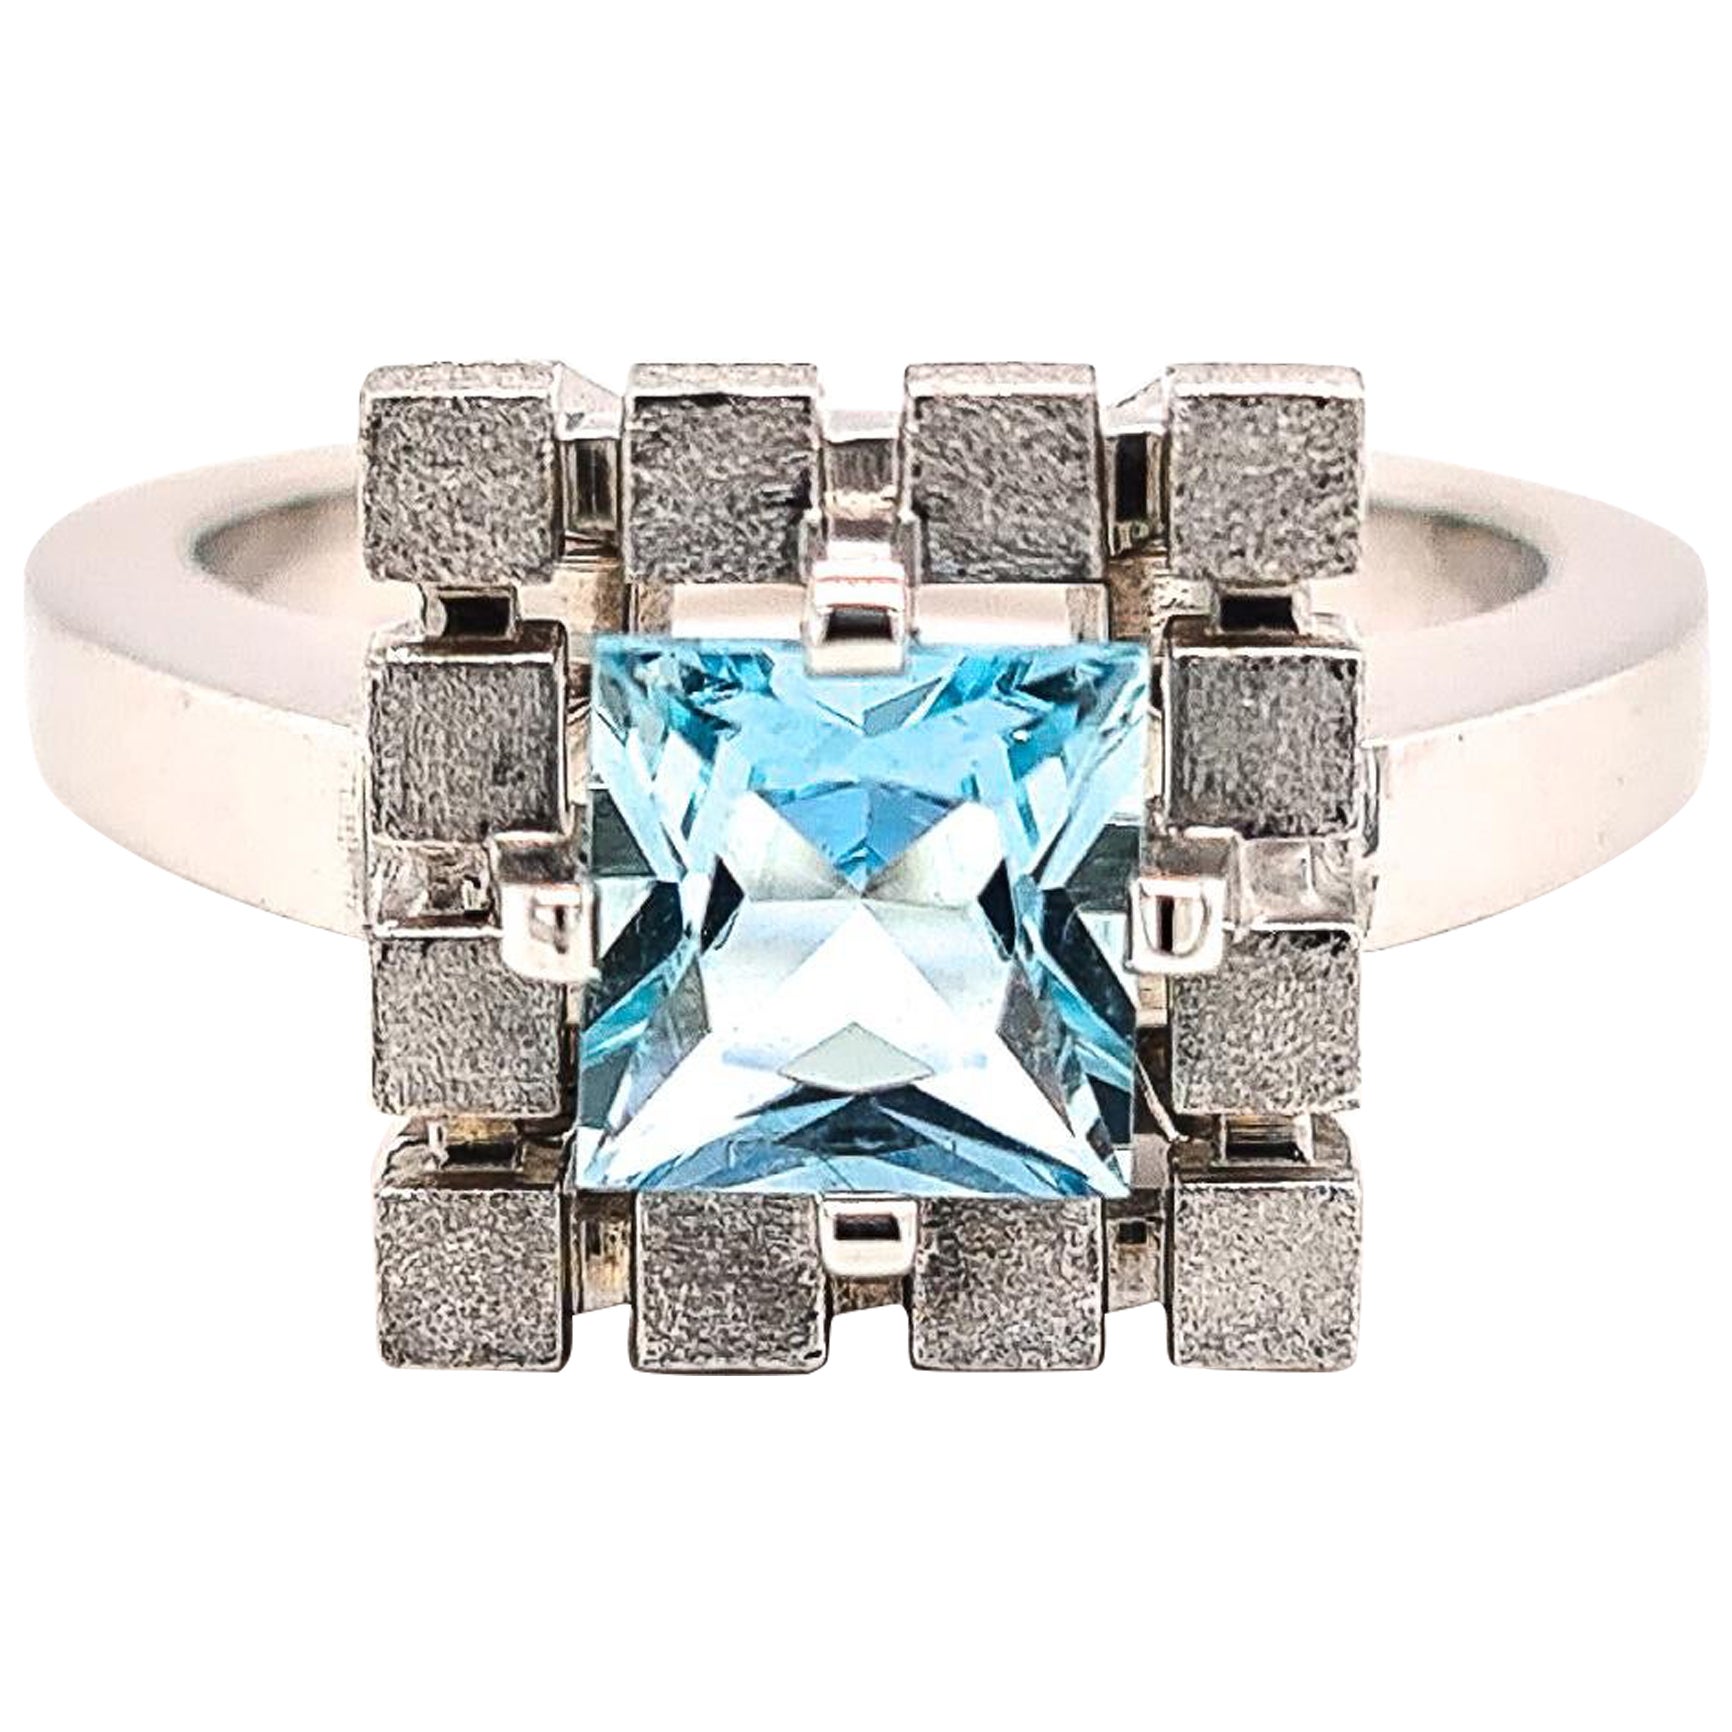 For Sale:  18ct White Gold and Aquamarine Ring "Cube"